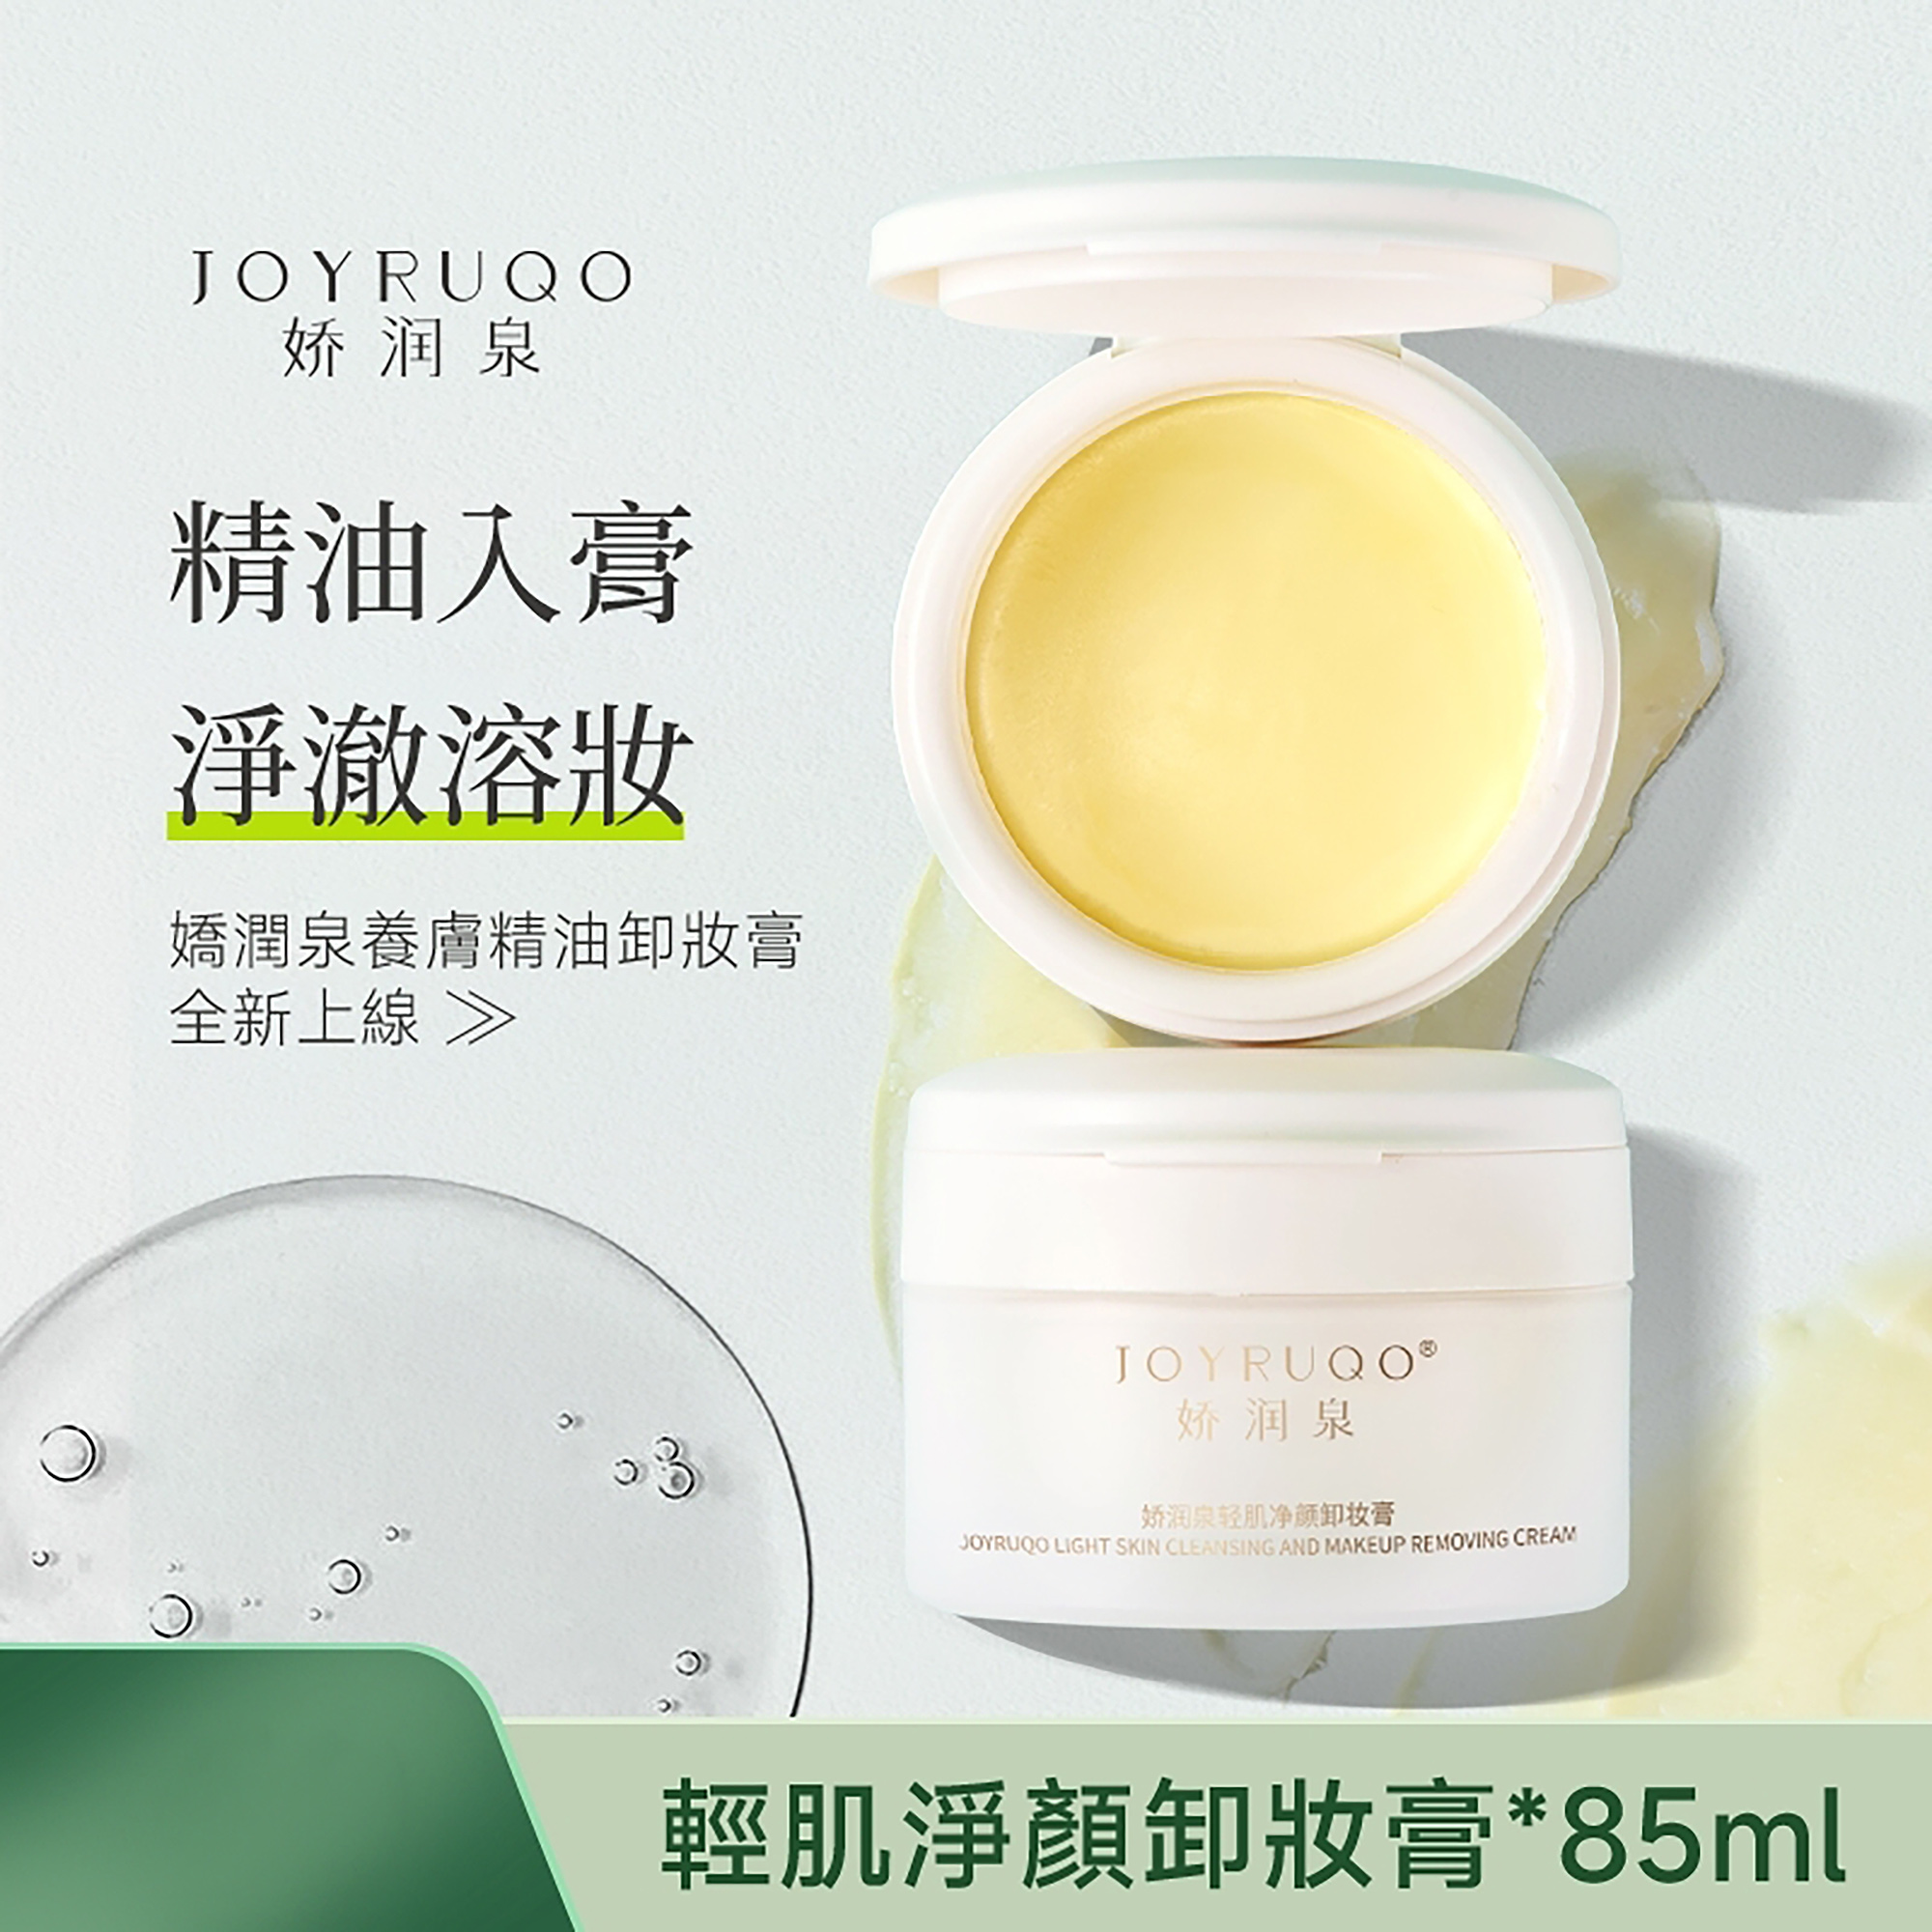 Light Skin Cleansing And Makeup Removing Cream